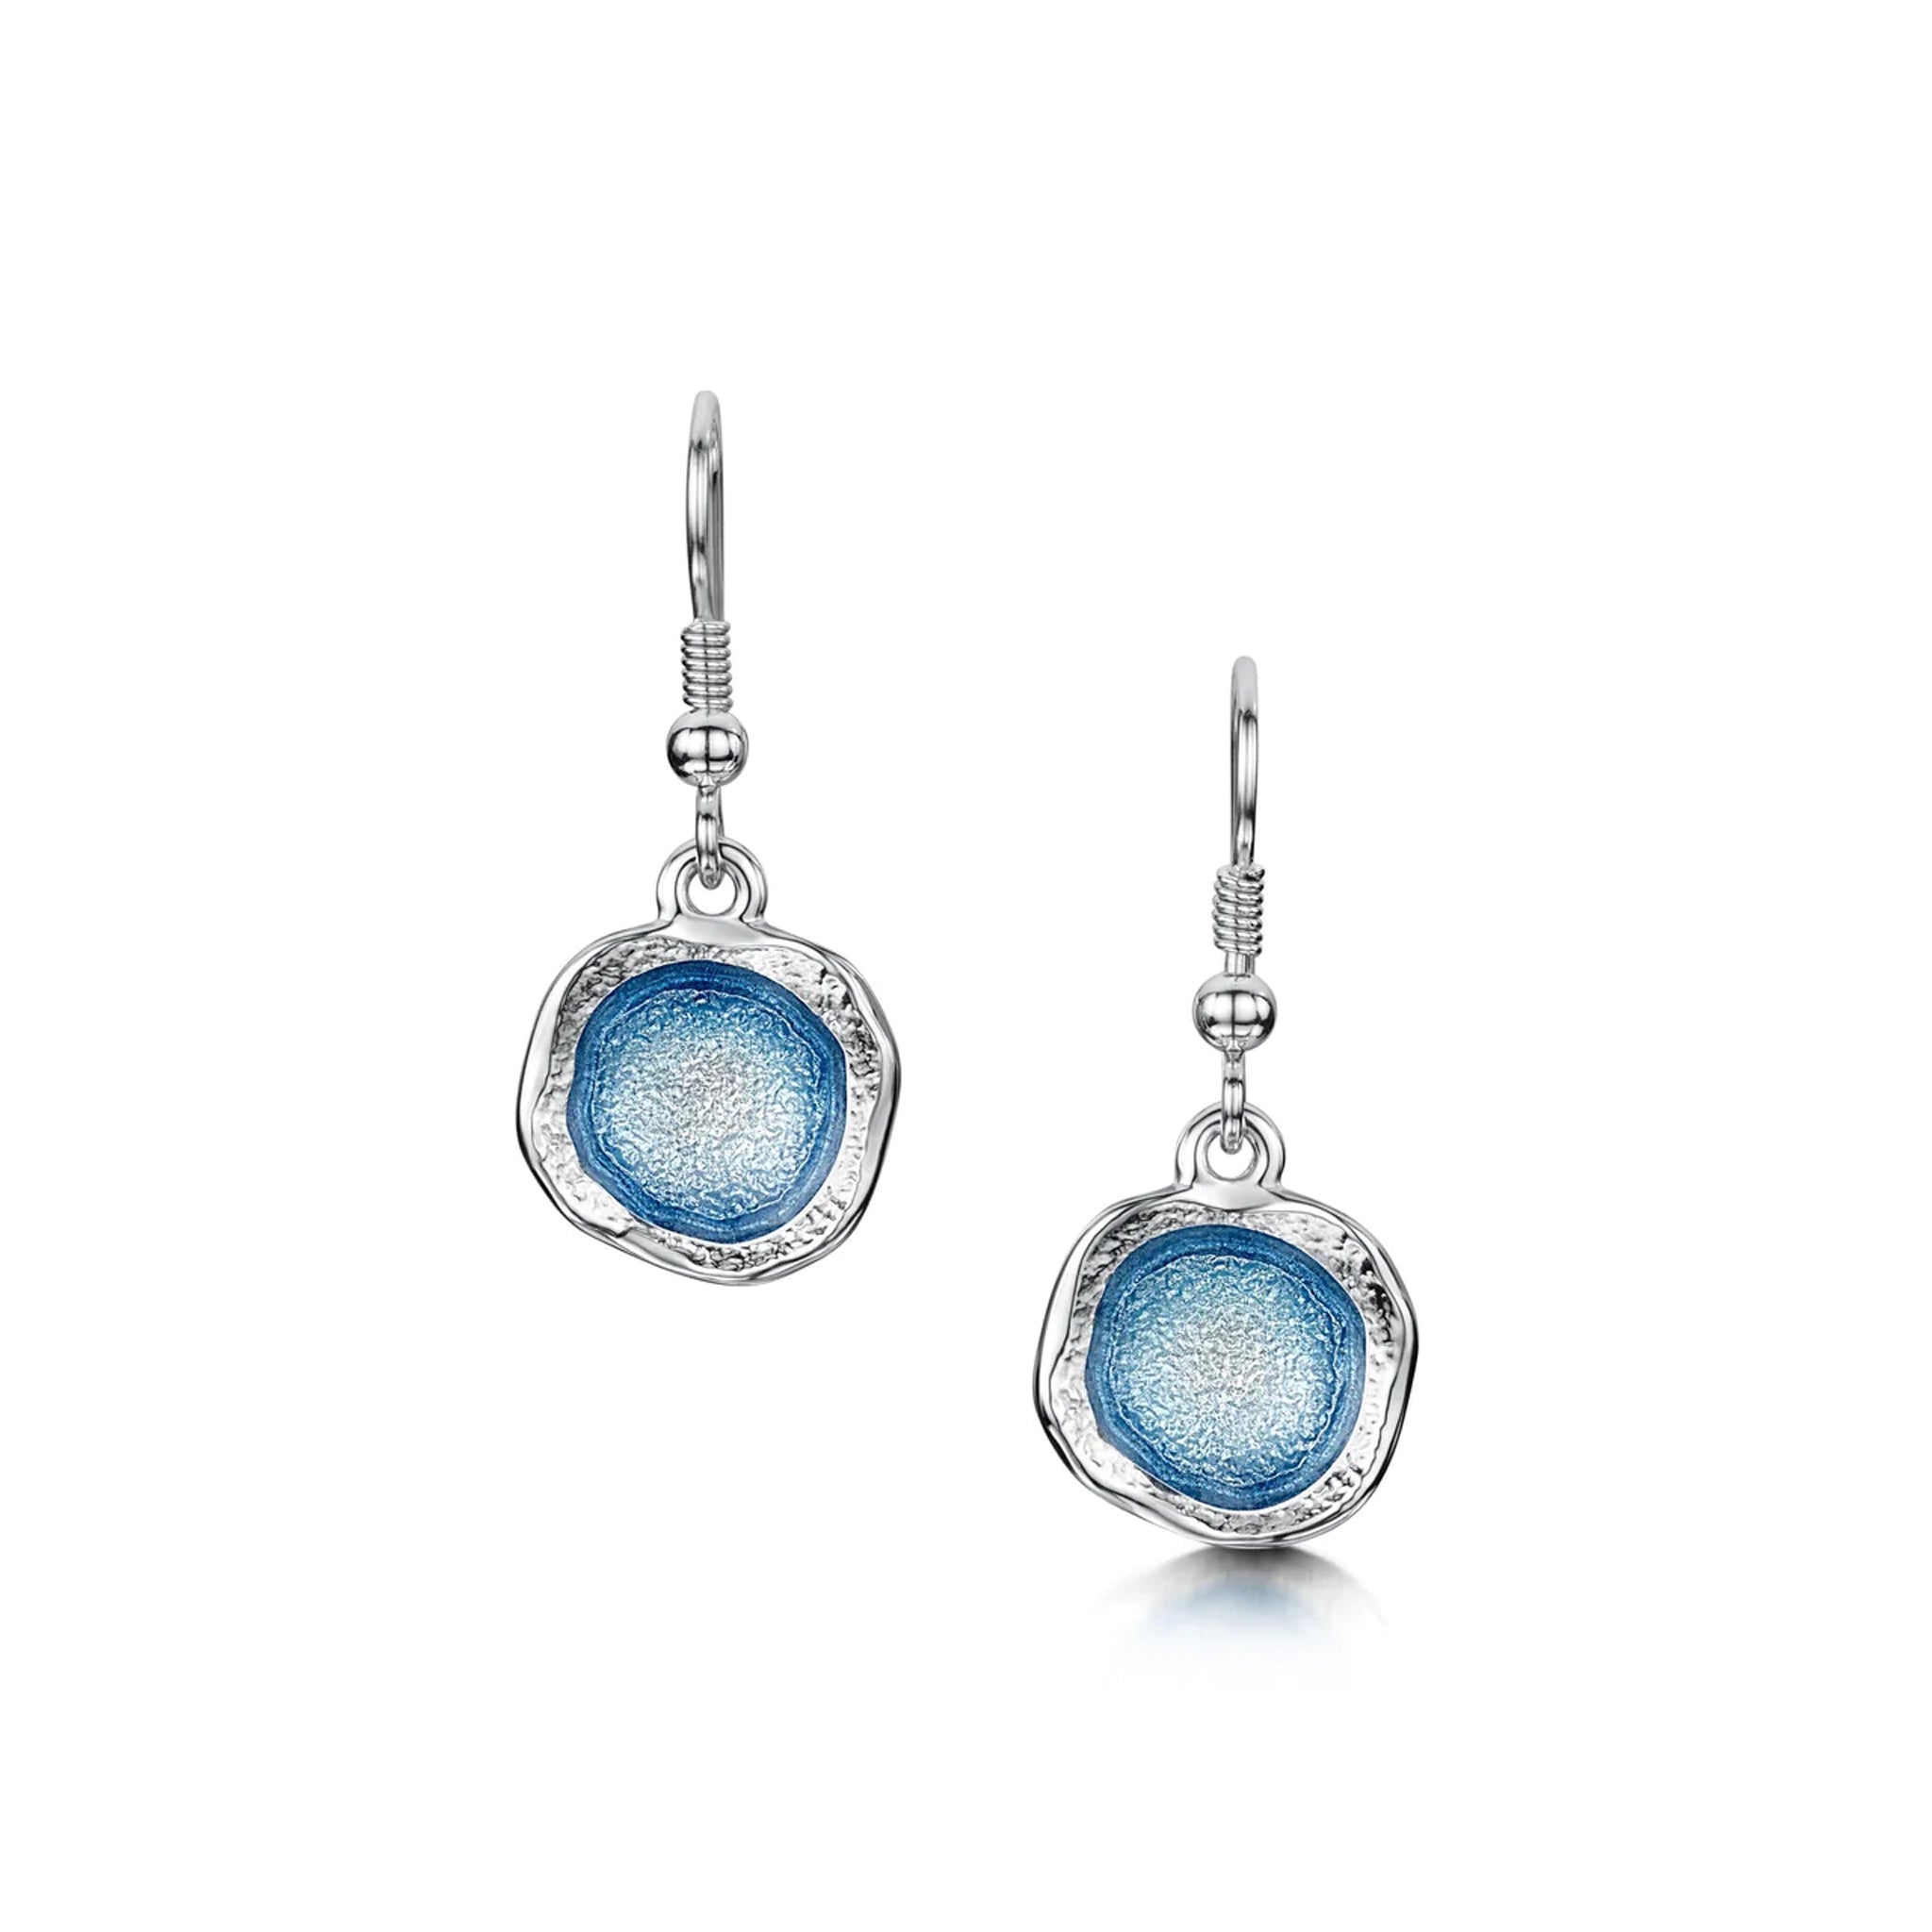 Silver drop earrings in an organic shape with subtle texture and blue enamelled centres on hook fastenings